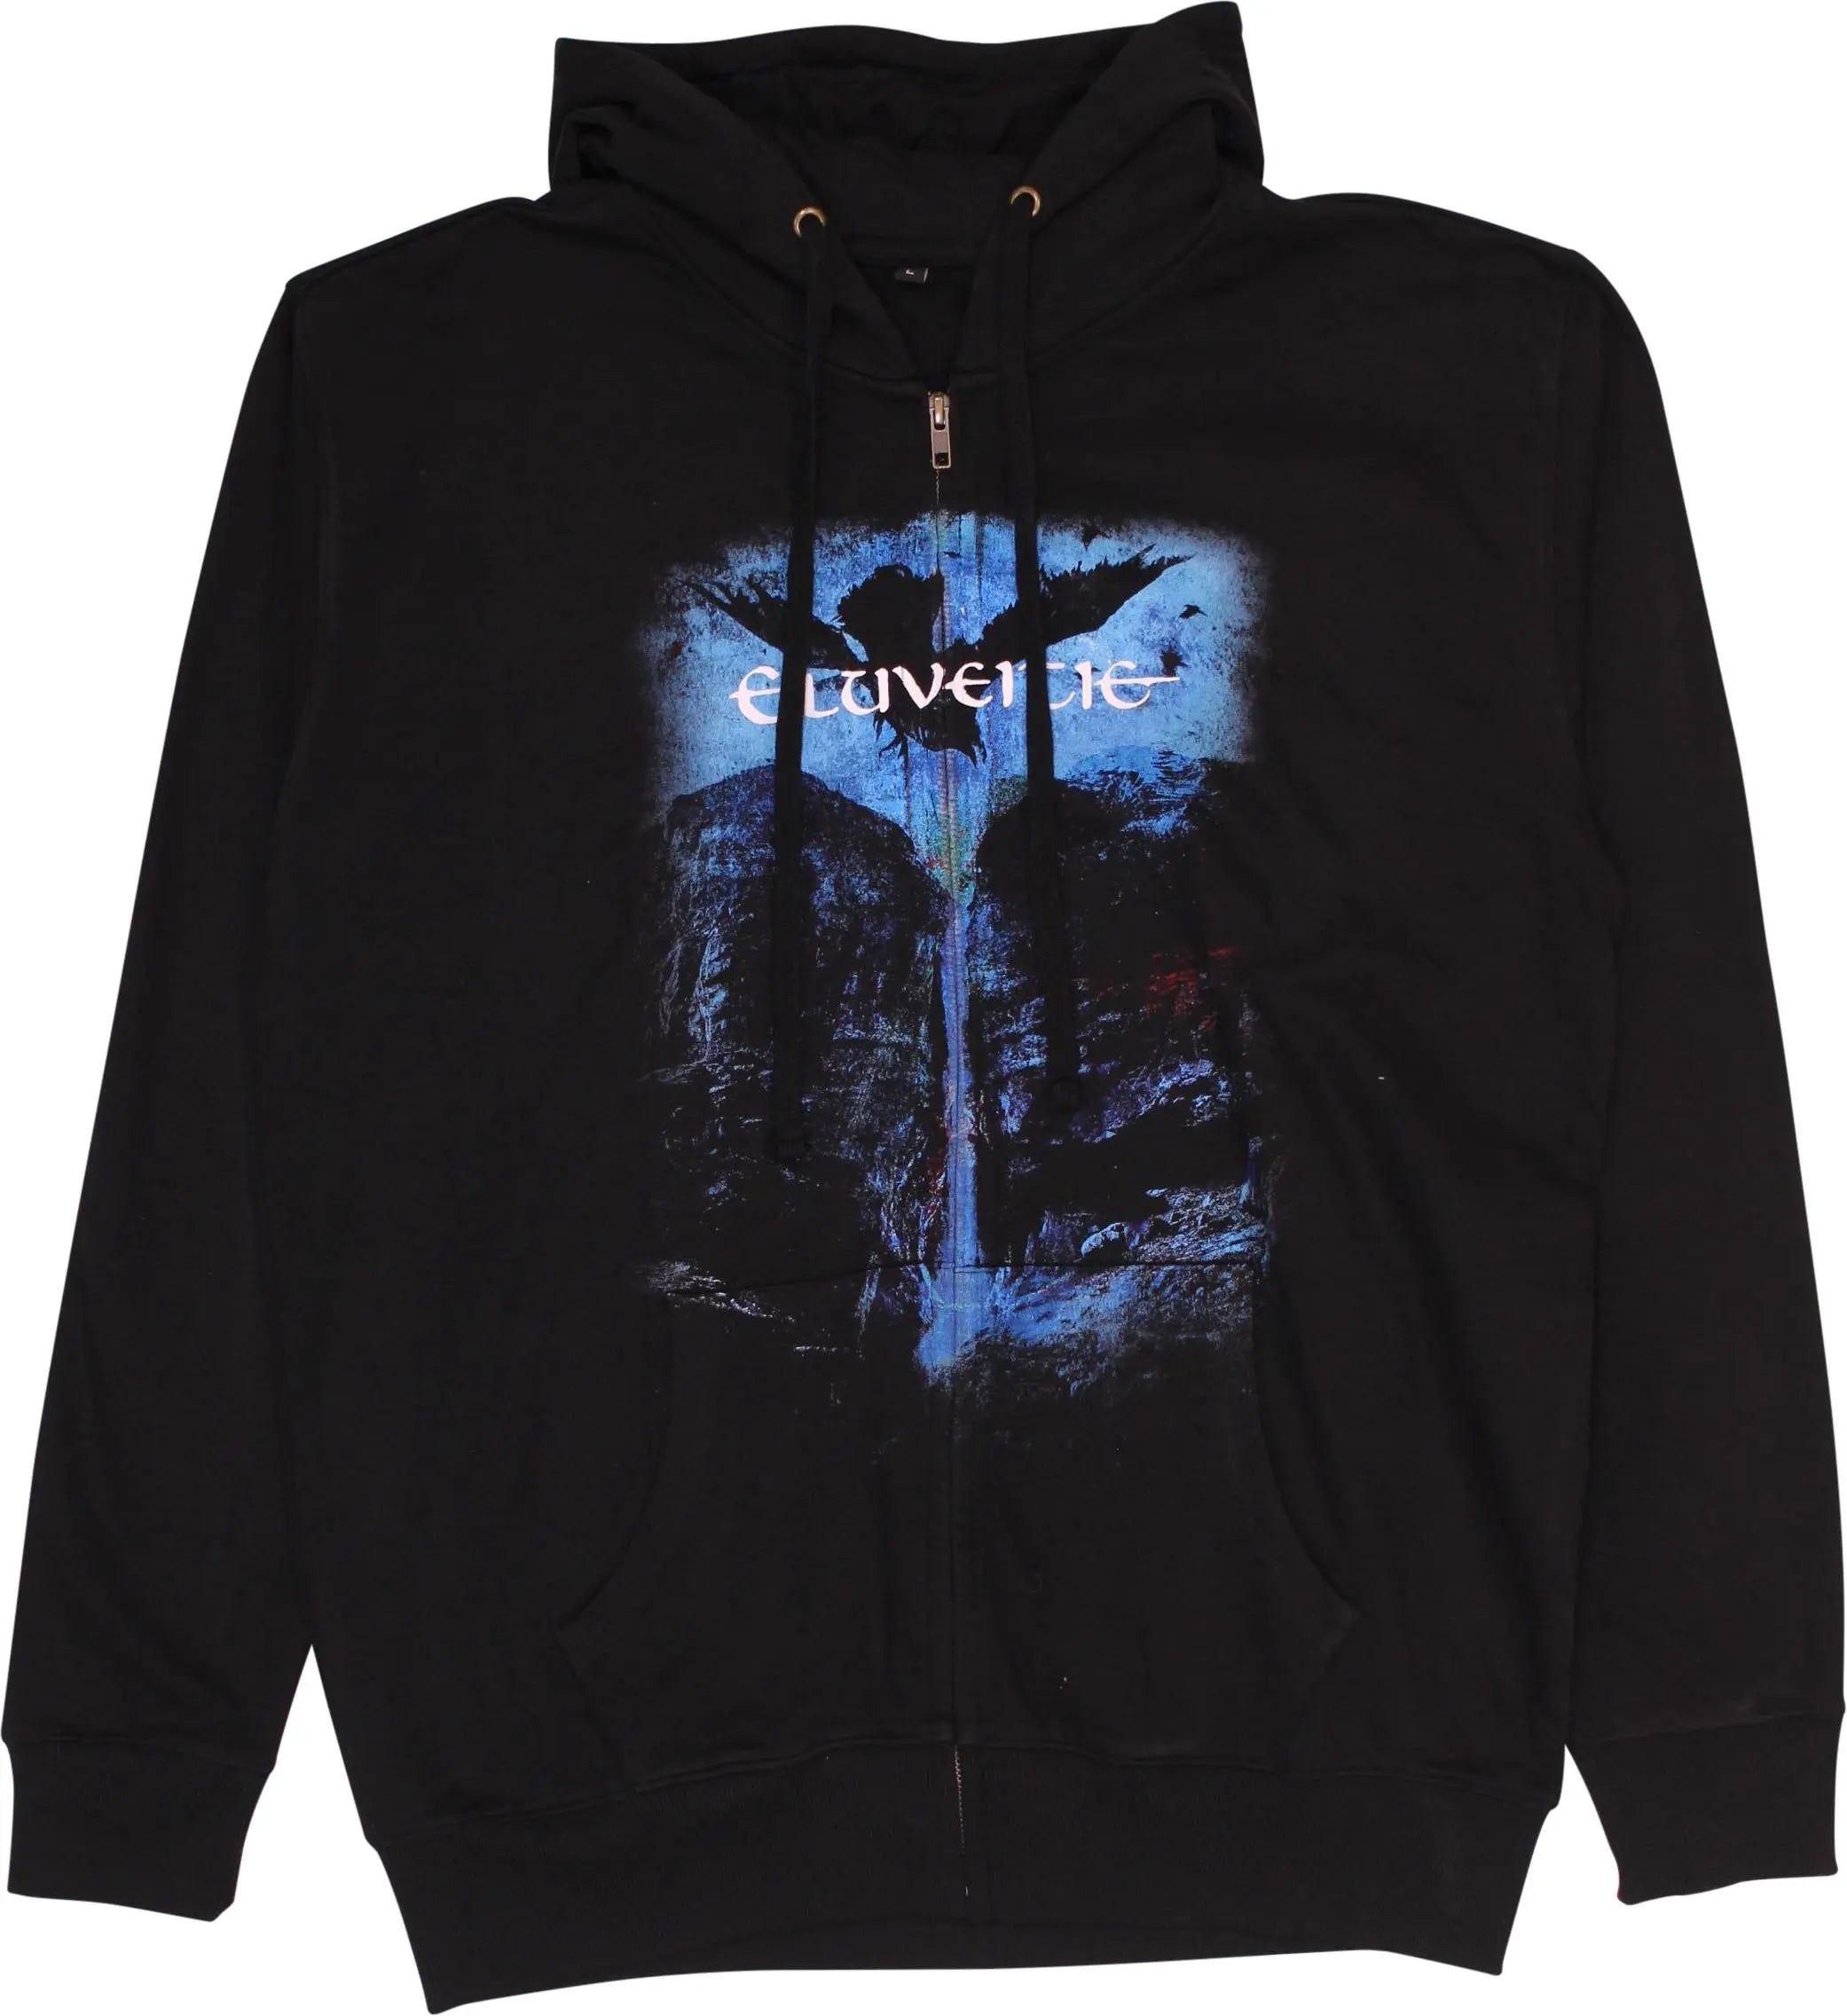 Eluveitie - Eluveitie Sweater with Hoodie- ThriftTale.com - Vintage and second handclothing